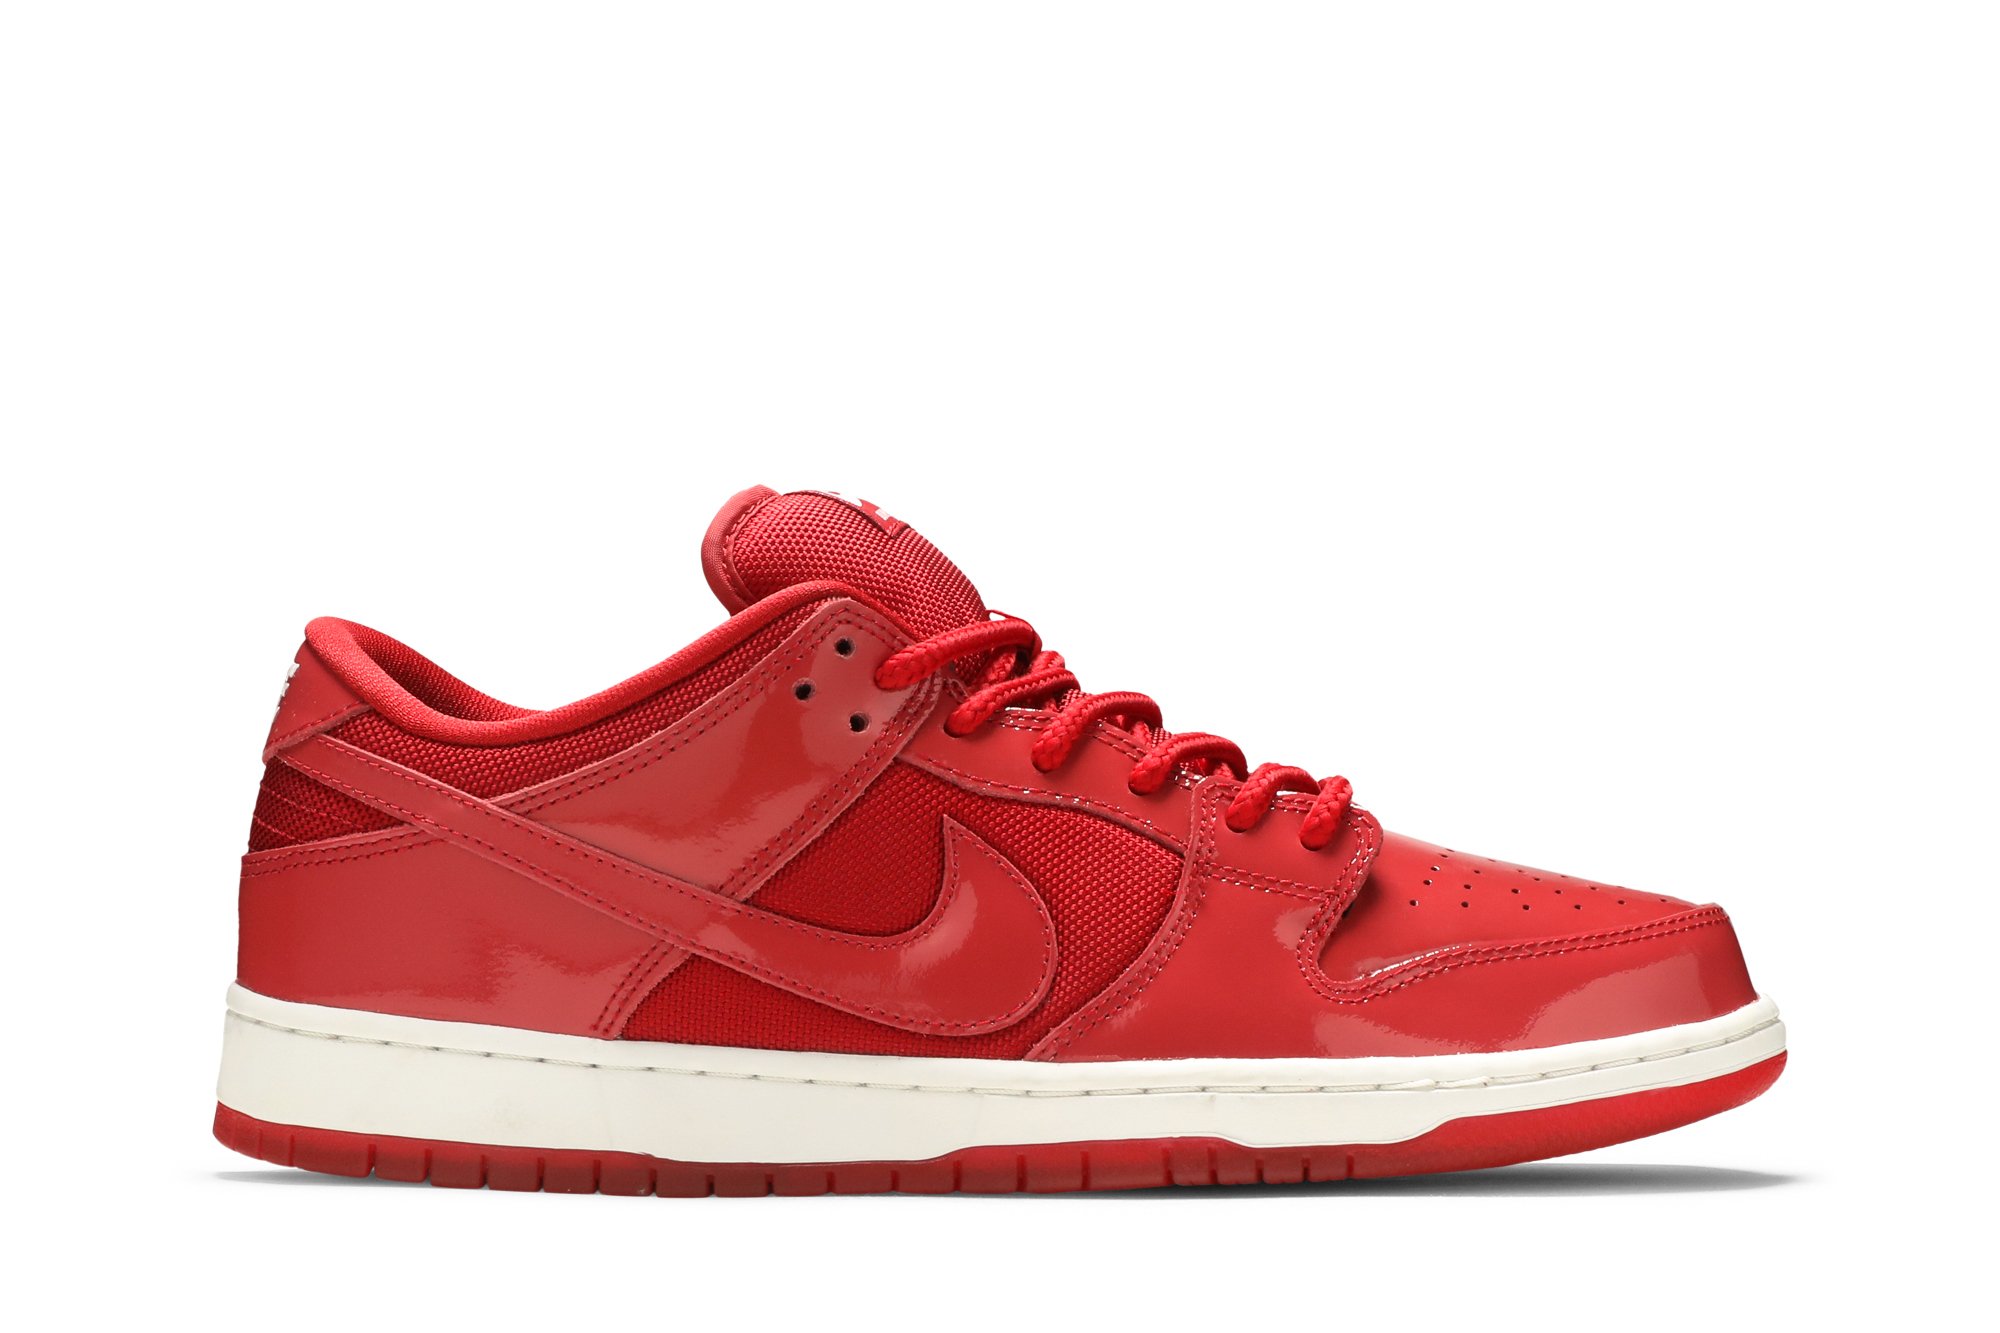 Nike Dunk SB Low Red Patent Leather 28.5